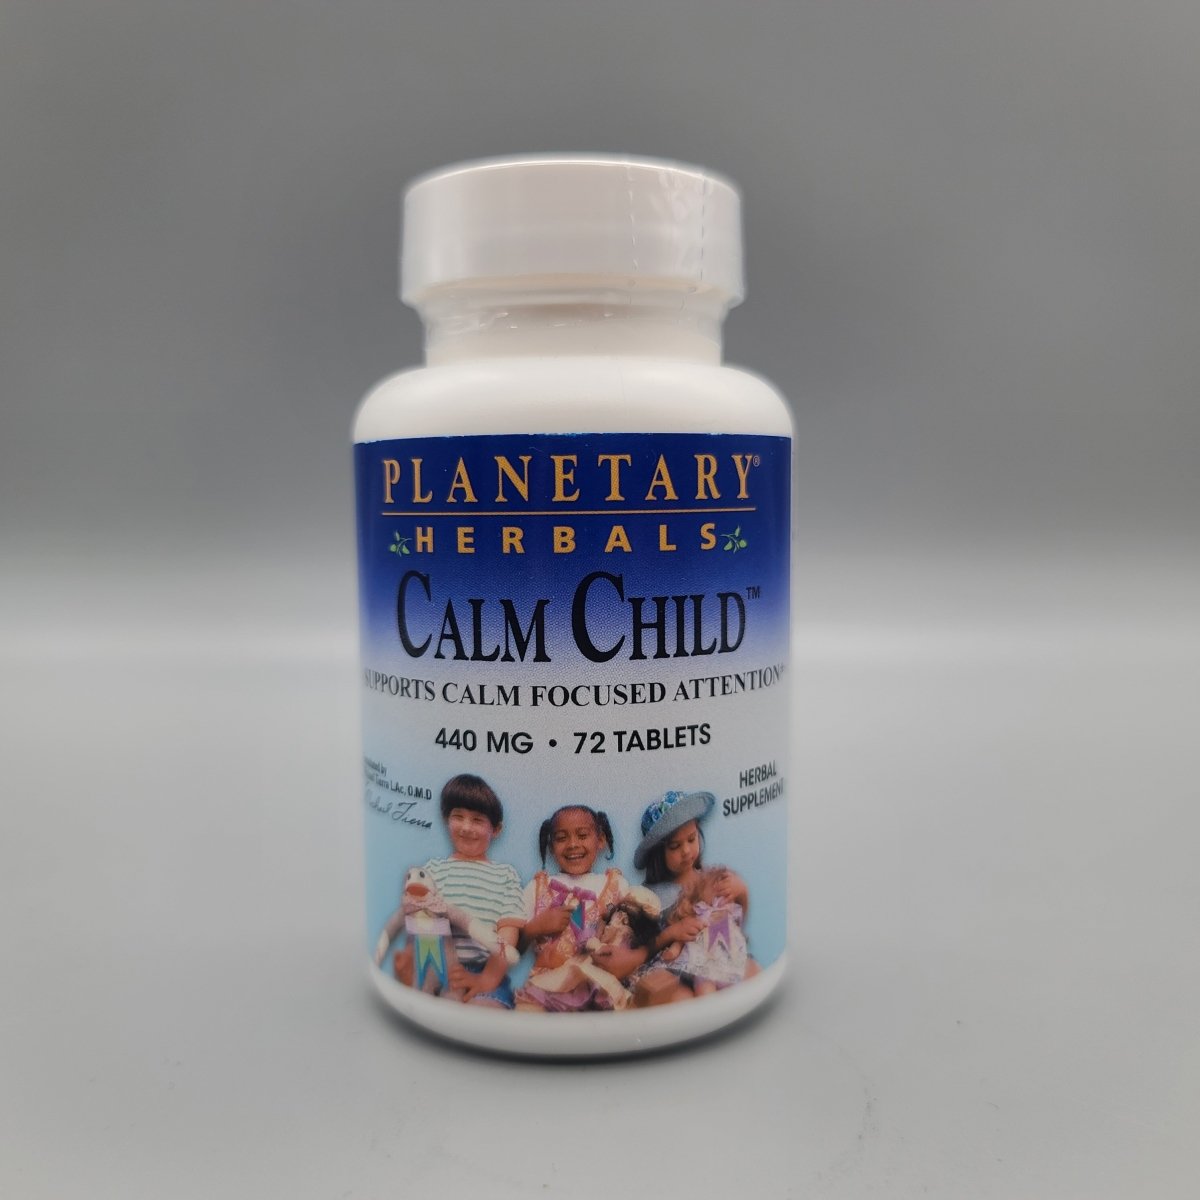 Calm Child - Supports Calm Focused Attention - 440mg - 72 Tablets